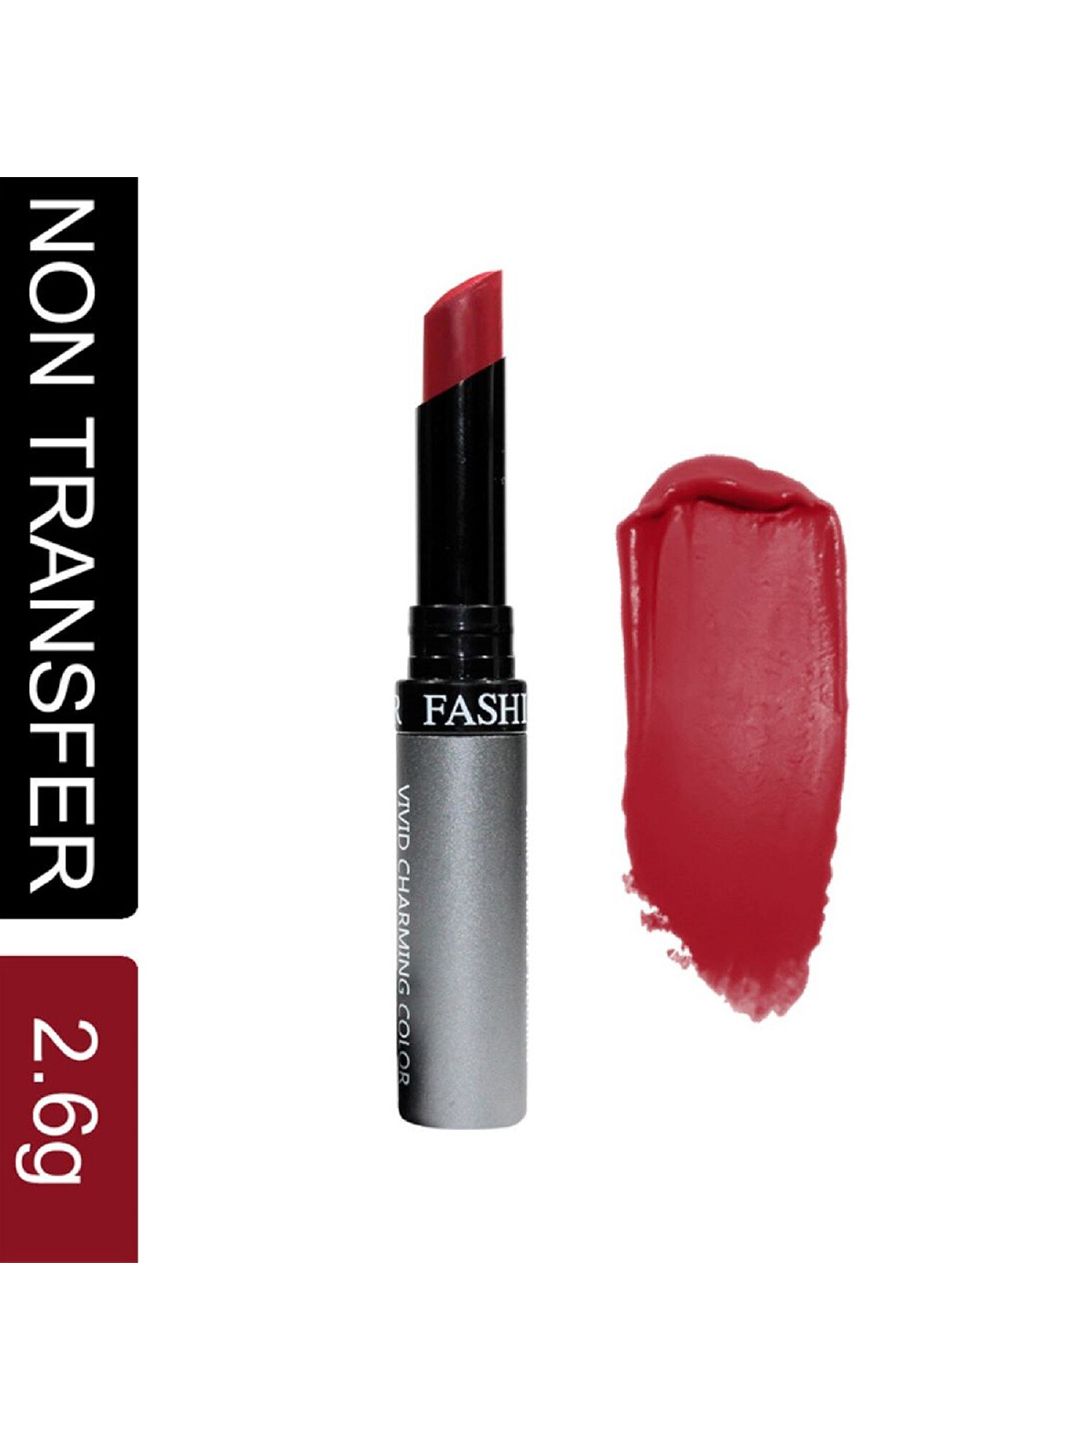 Fashion Colour Kiss Lip No-Transfer Waterproof Lipstick 2.6 g - Umber 63 Price in India